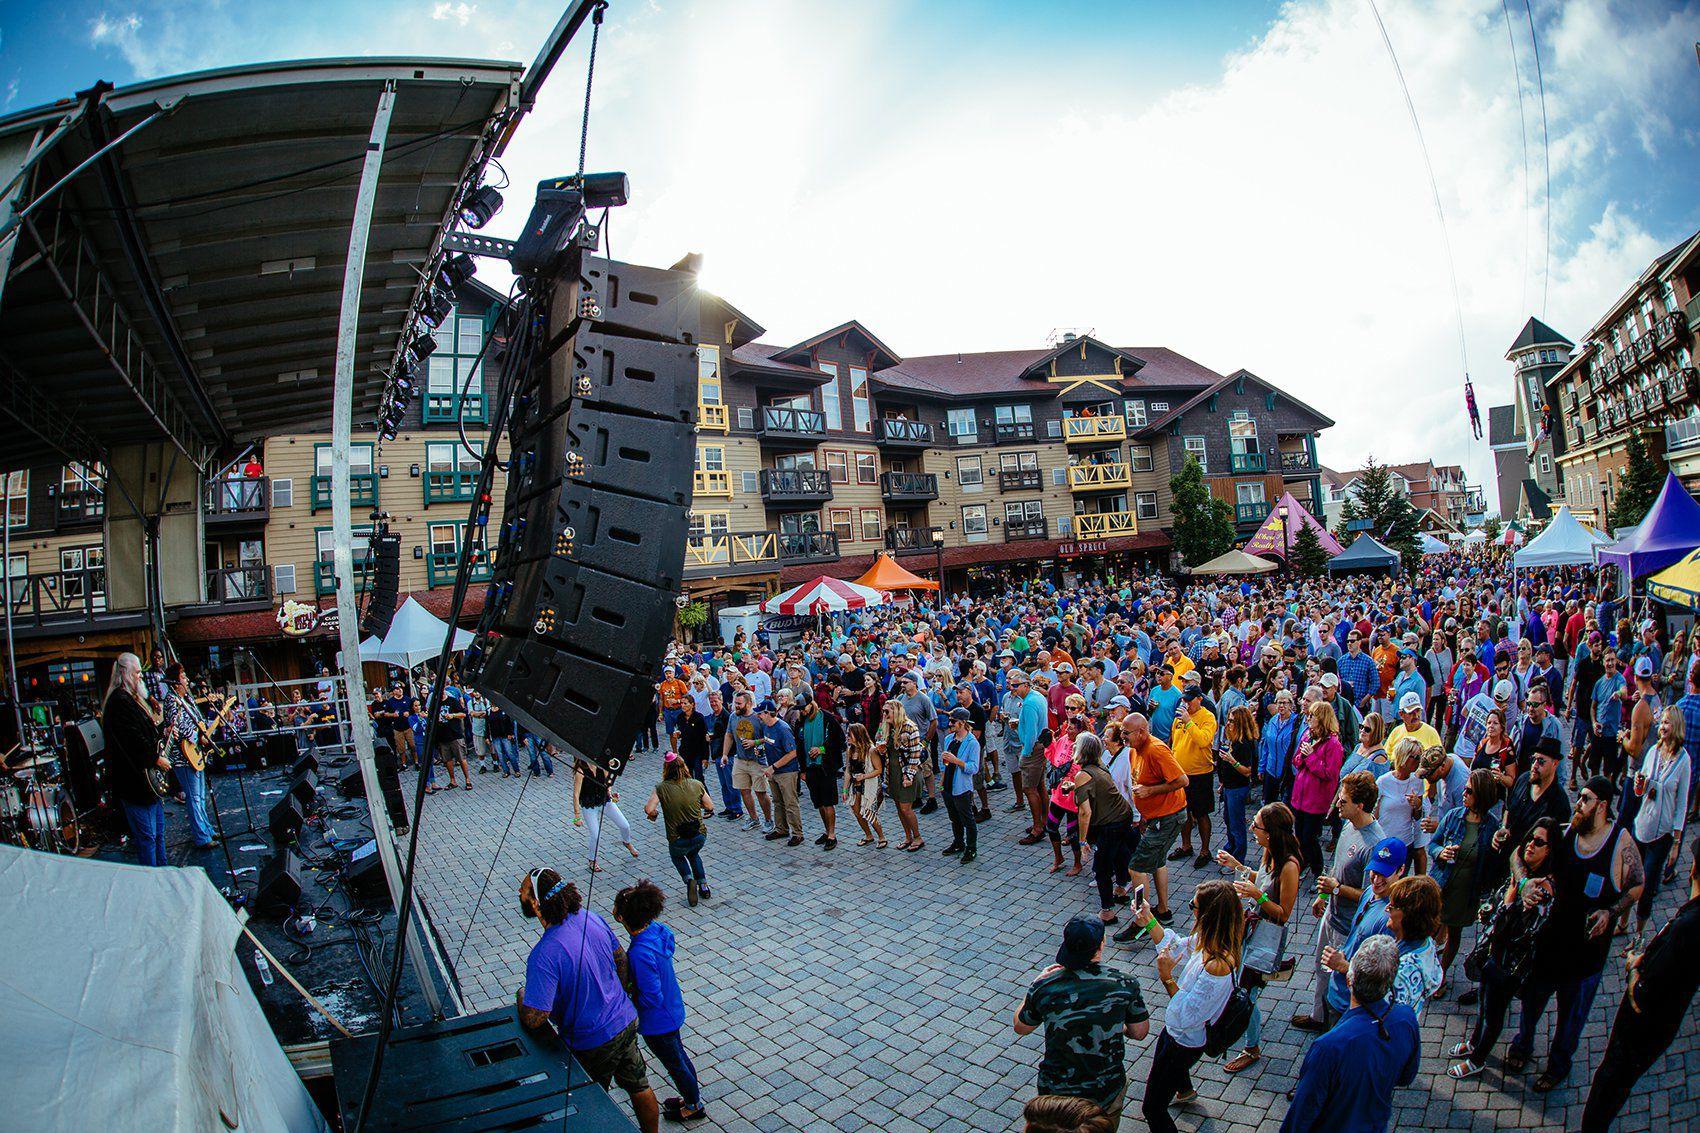 Snowshoe Mountain Announces Lineup of music and brews for annual Blues, Brews, BBQ